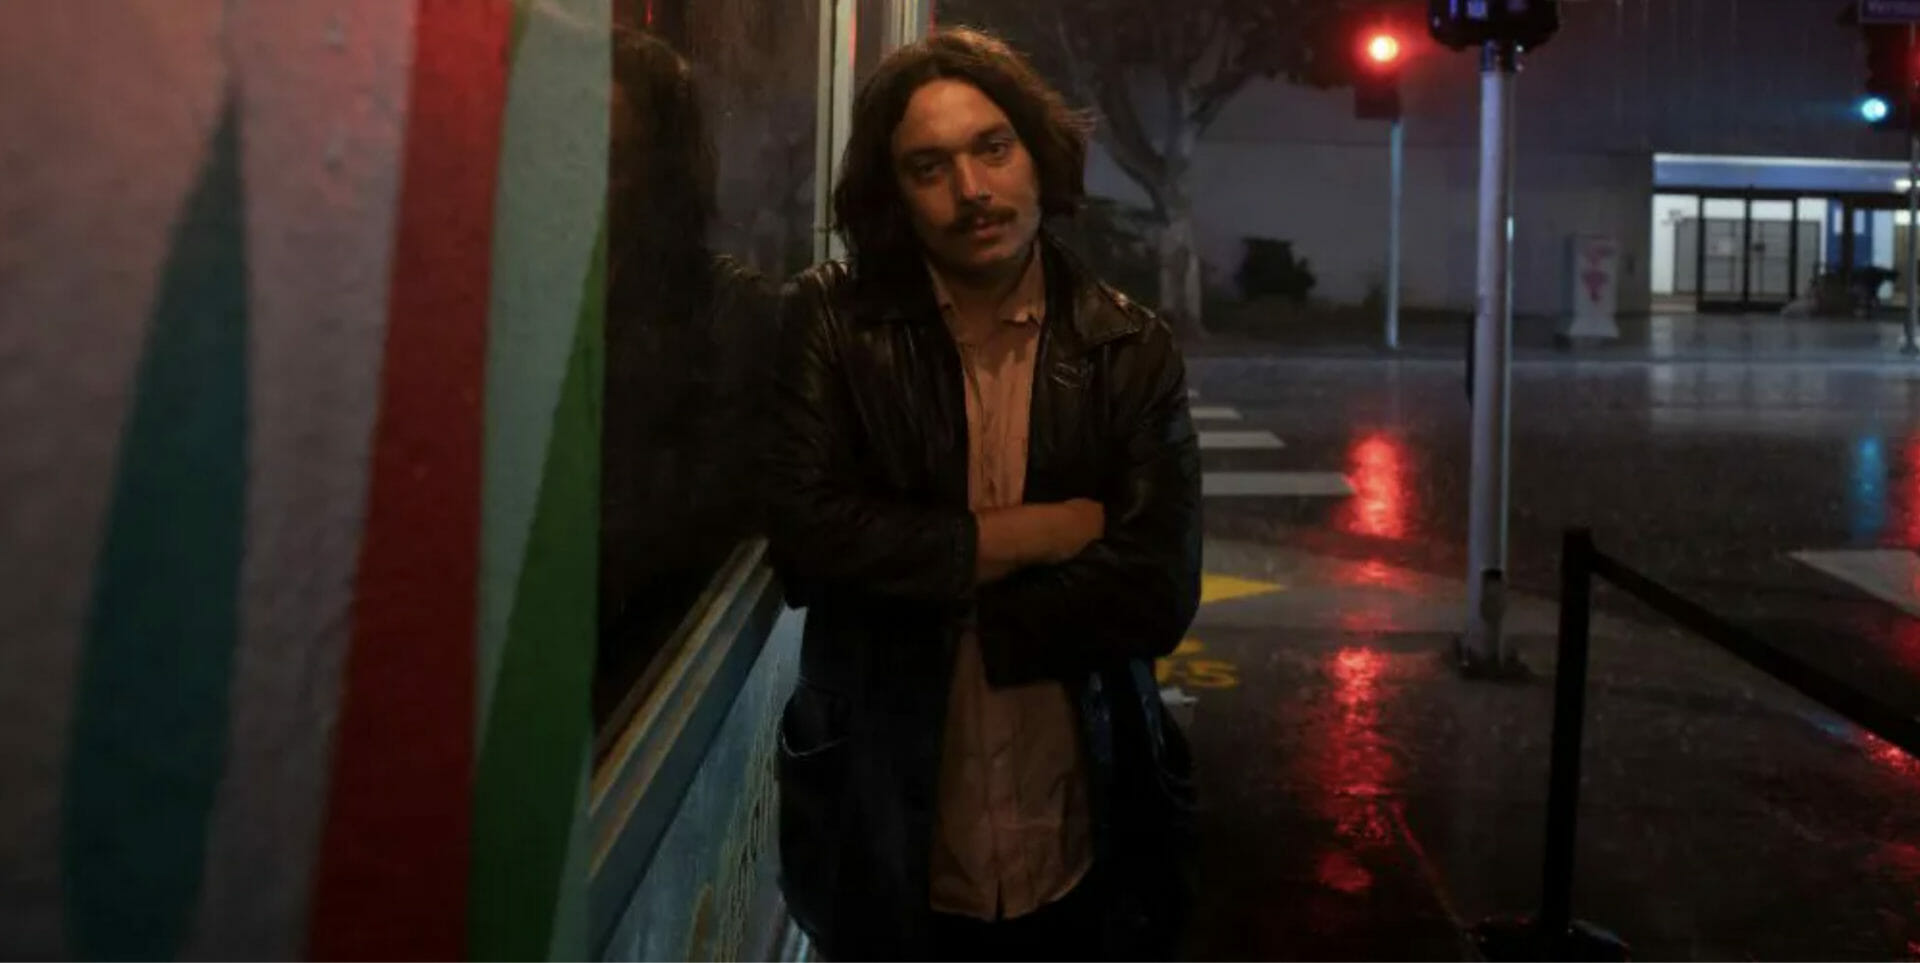 Watch: Drugdealer Unveil New Album ‘Hiding in Plain Sight,’ Share Video for “Someone to Love”